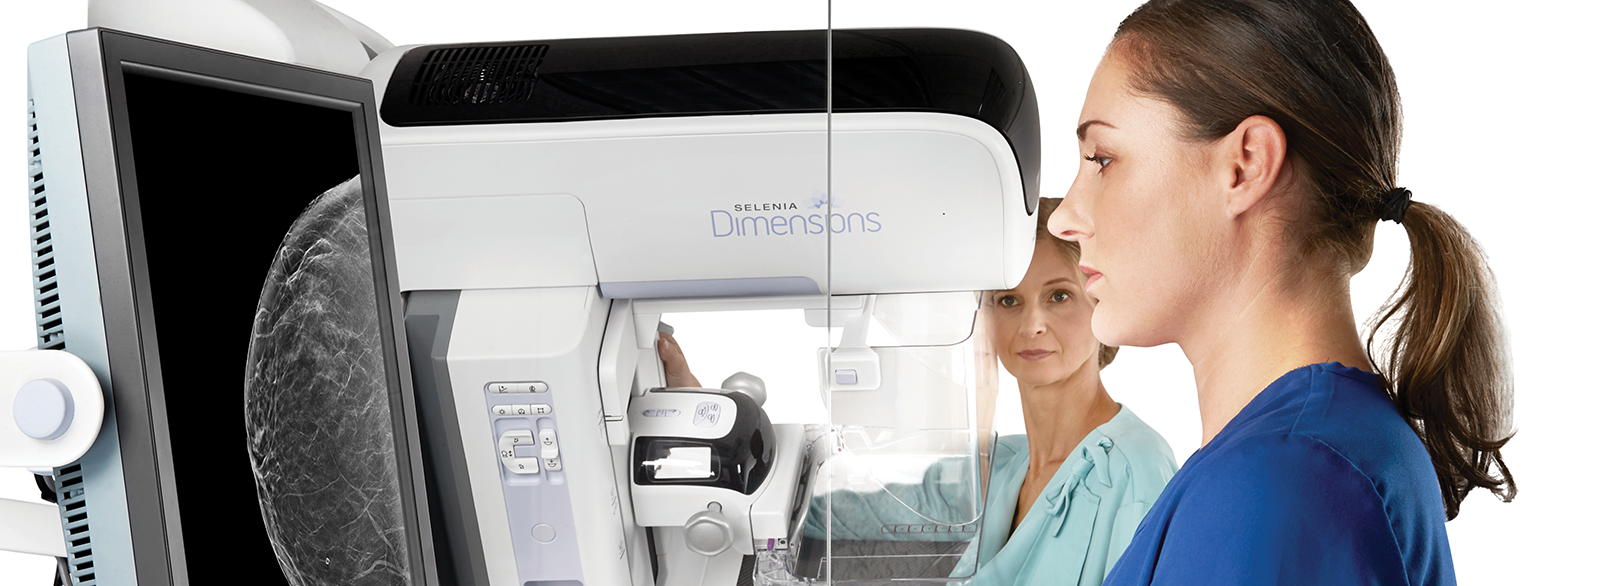 3d mammography digital breast tomosynthesis